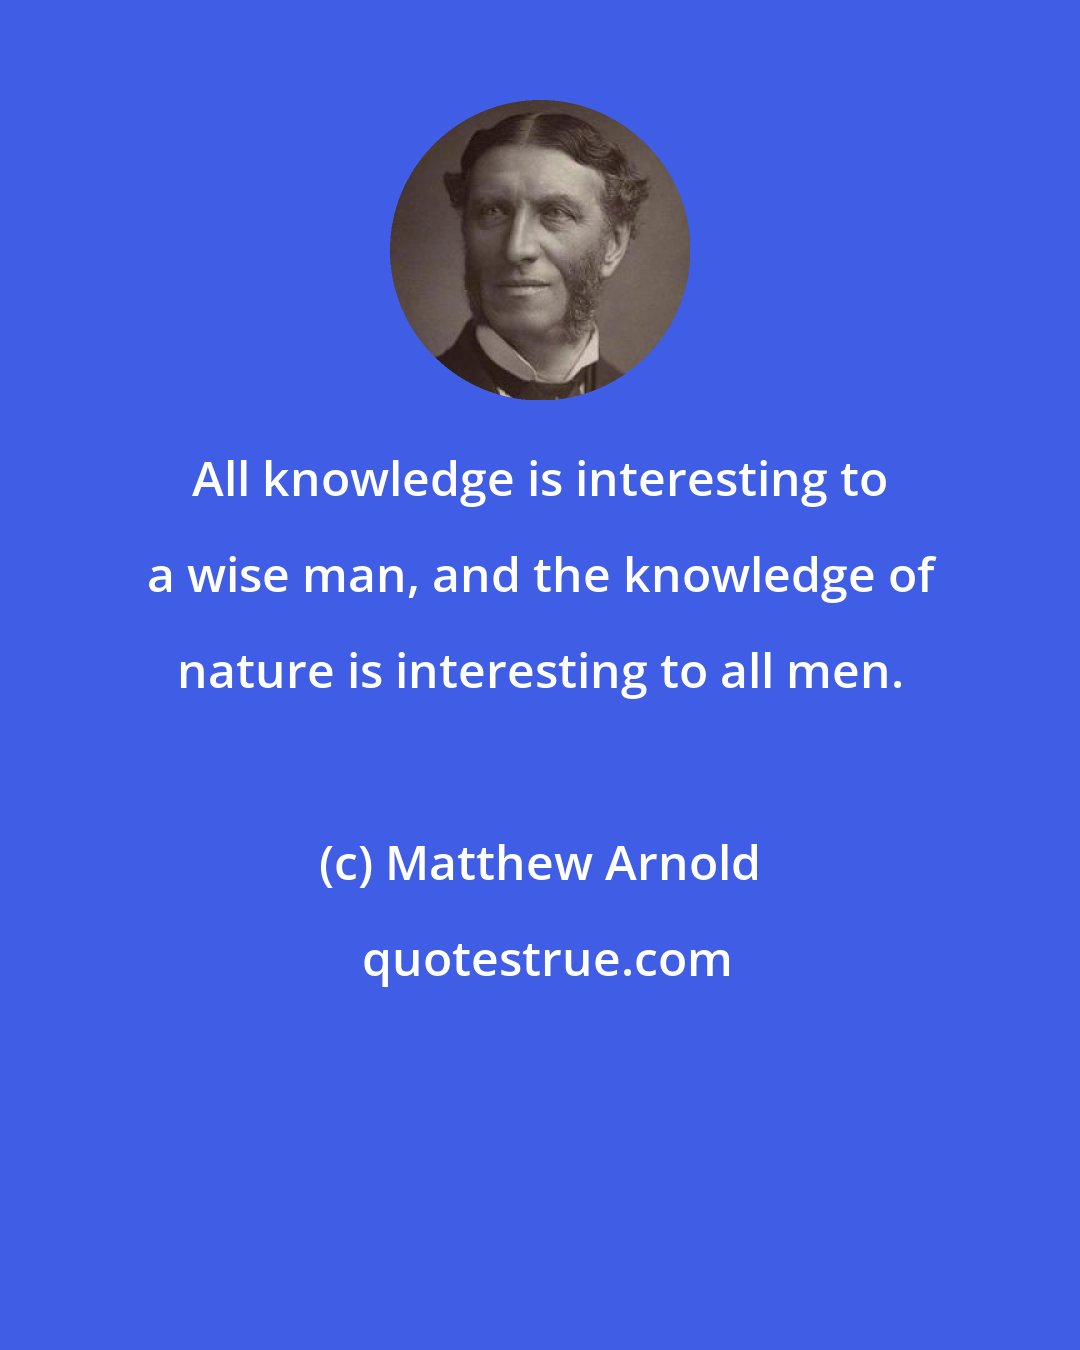 Matthew Arnold: All knowledge is interesting to a wise man, and the knowledge of nature is interesting to all men.